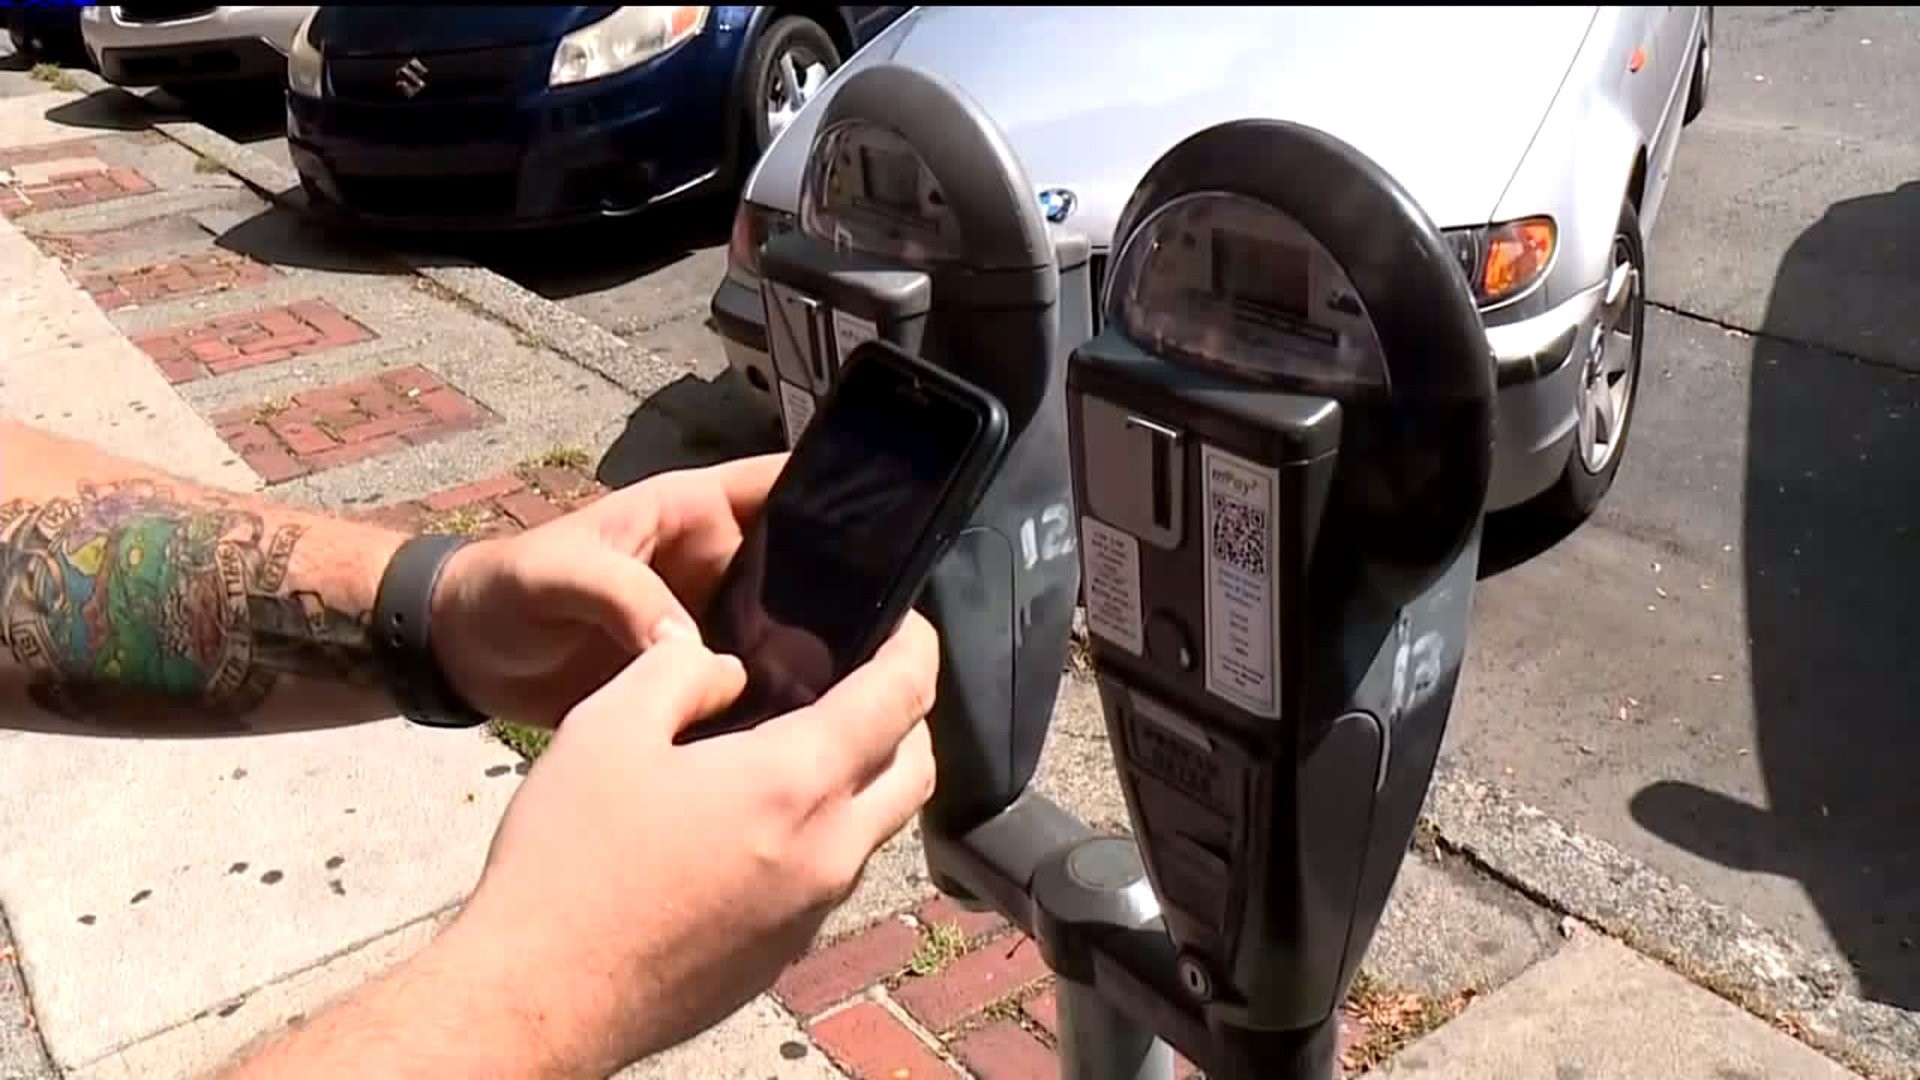 Mobile App Parking Launches in Downtown Stroudsburg